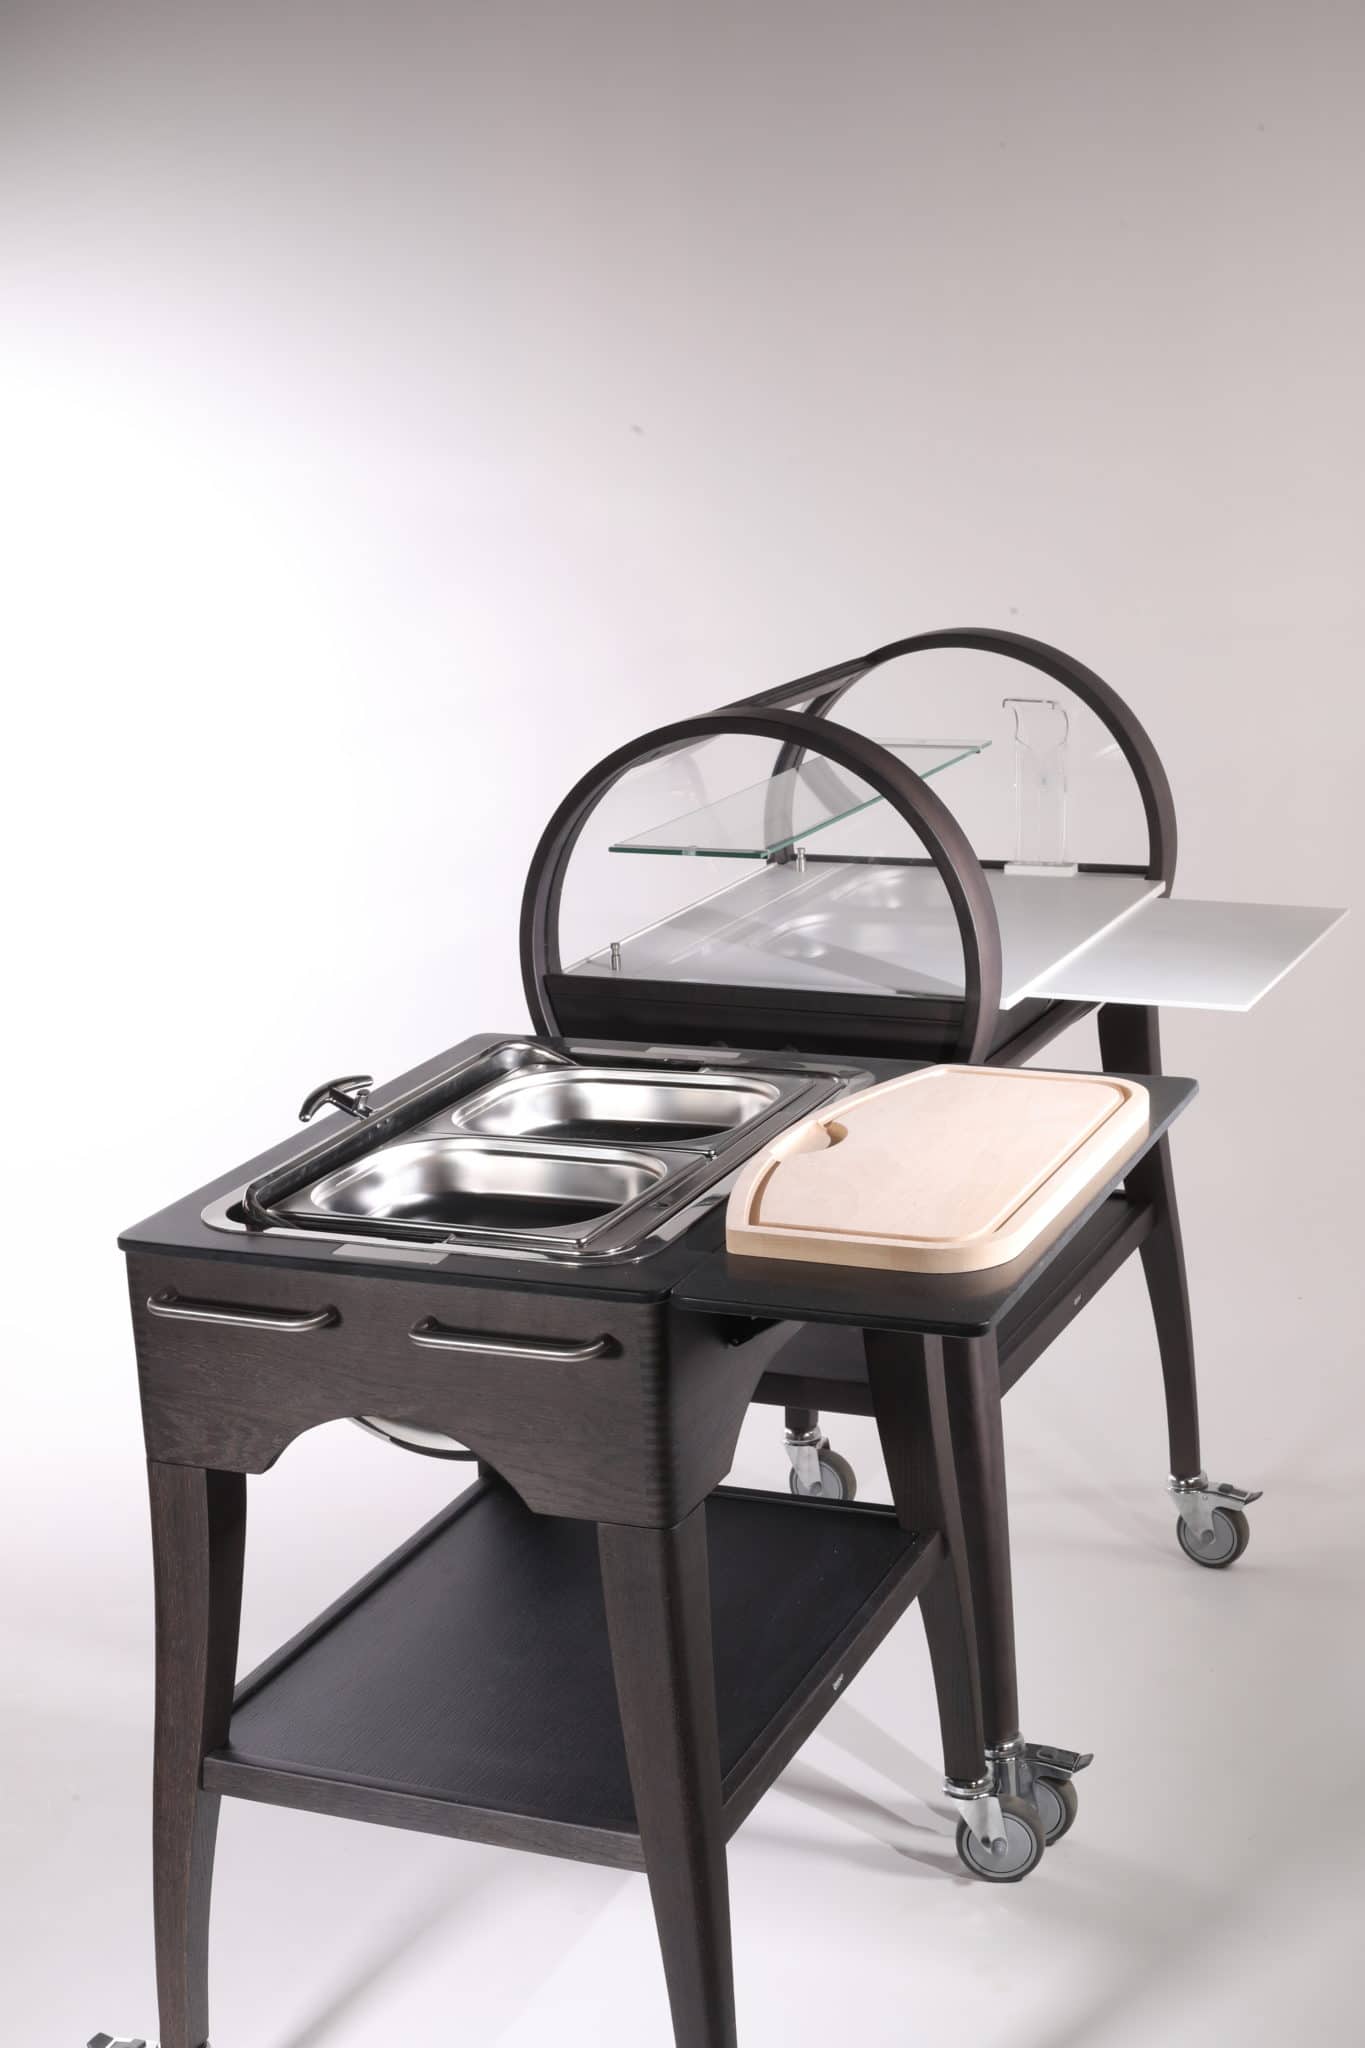 KACHAUD chaffing-dish trolley and Sweet Kit dessert trolley from QUISO in black oak